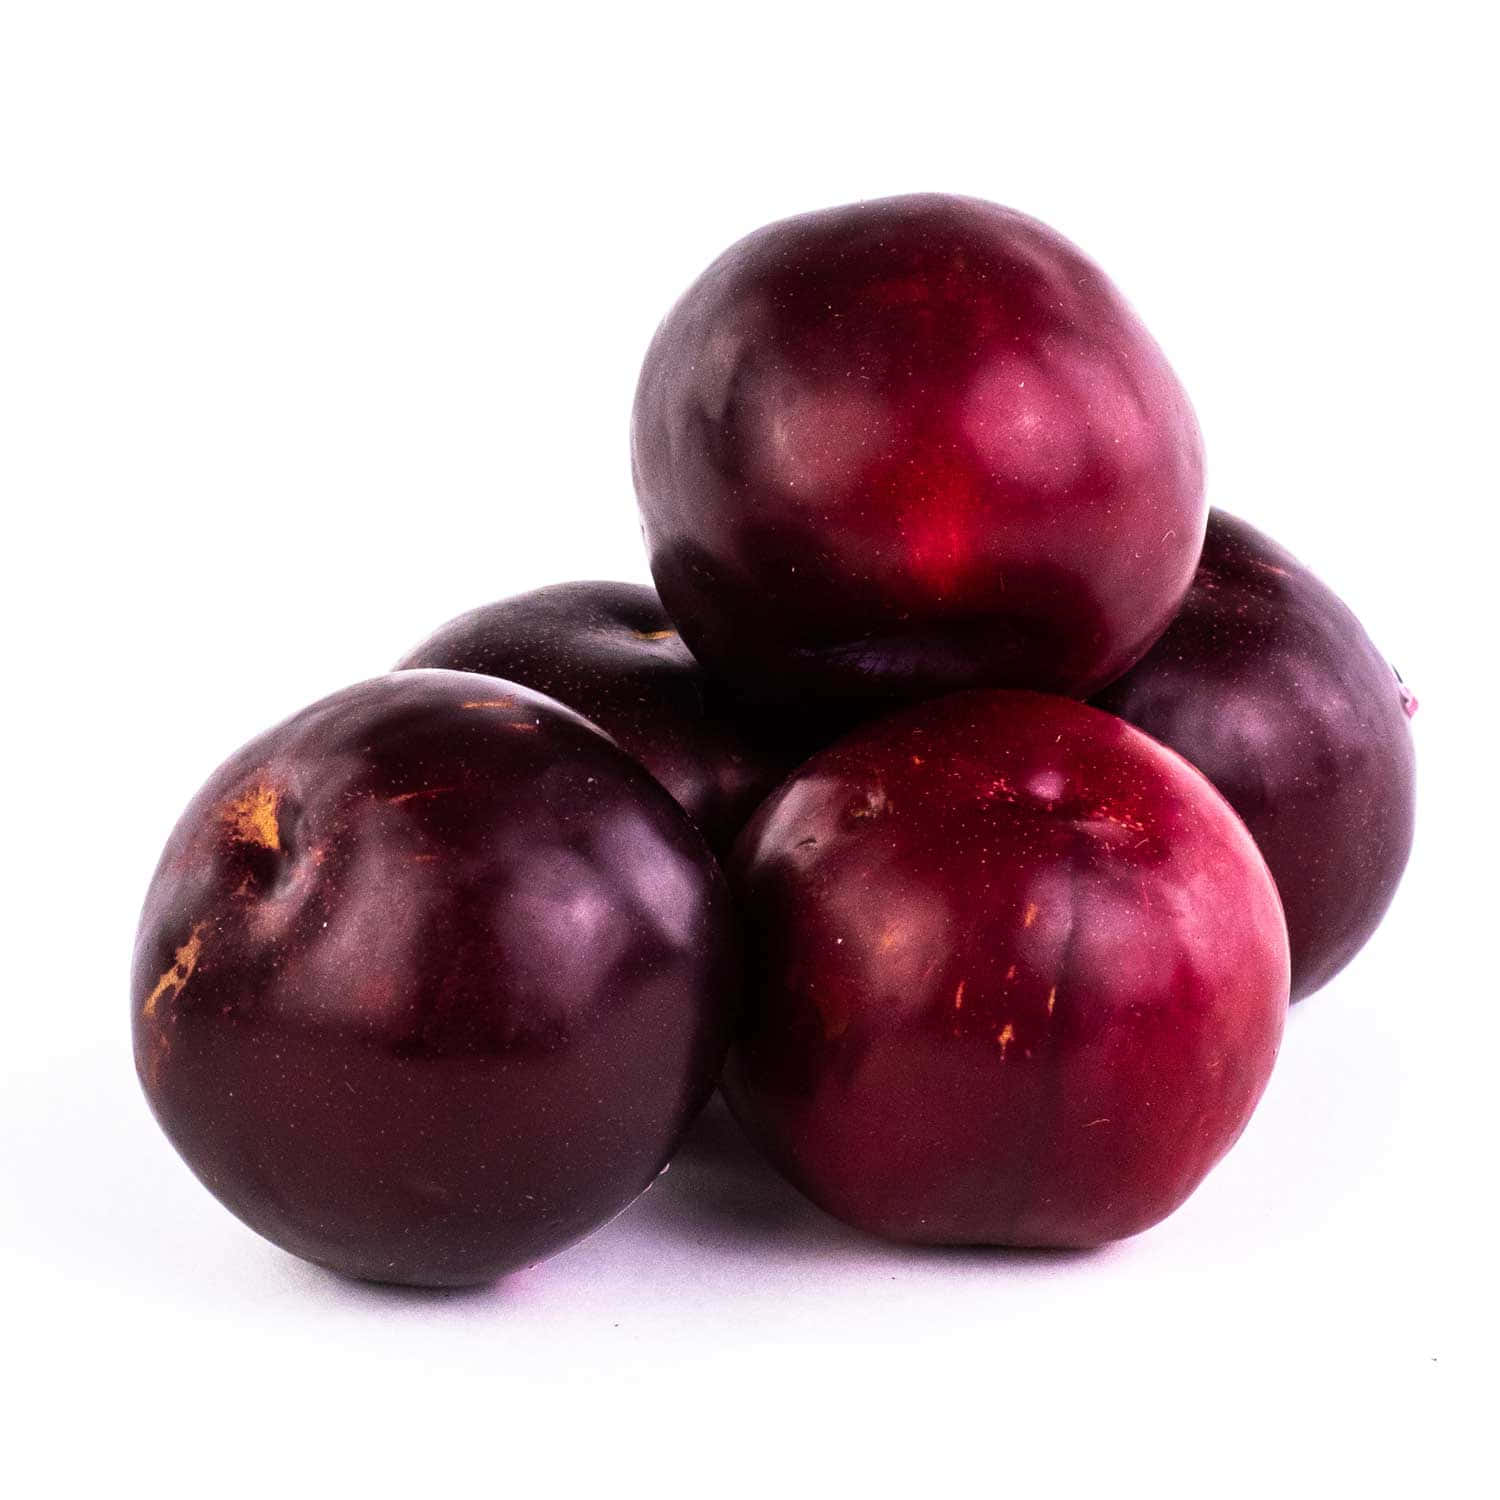 Juicy Red Plum on a Rustic Wooden Background Wallpaper